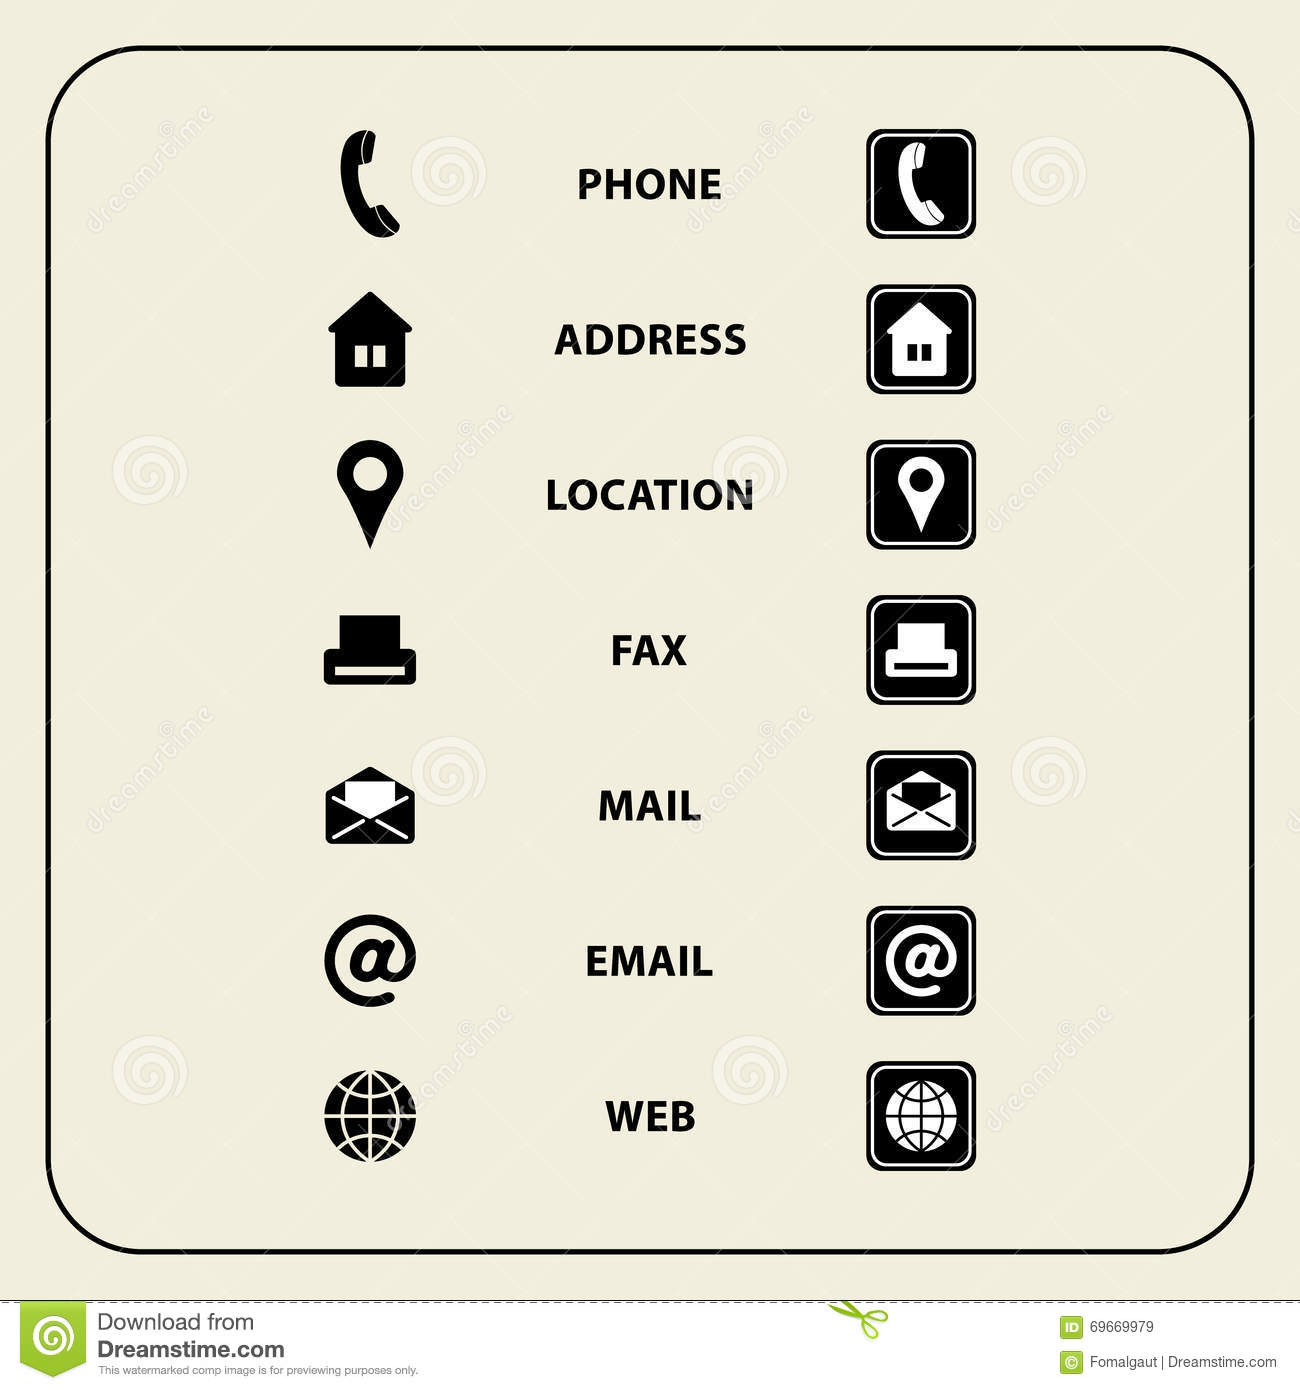 Set Of Web Icons For Business Cards, Finance And Communication 